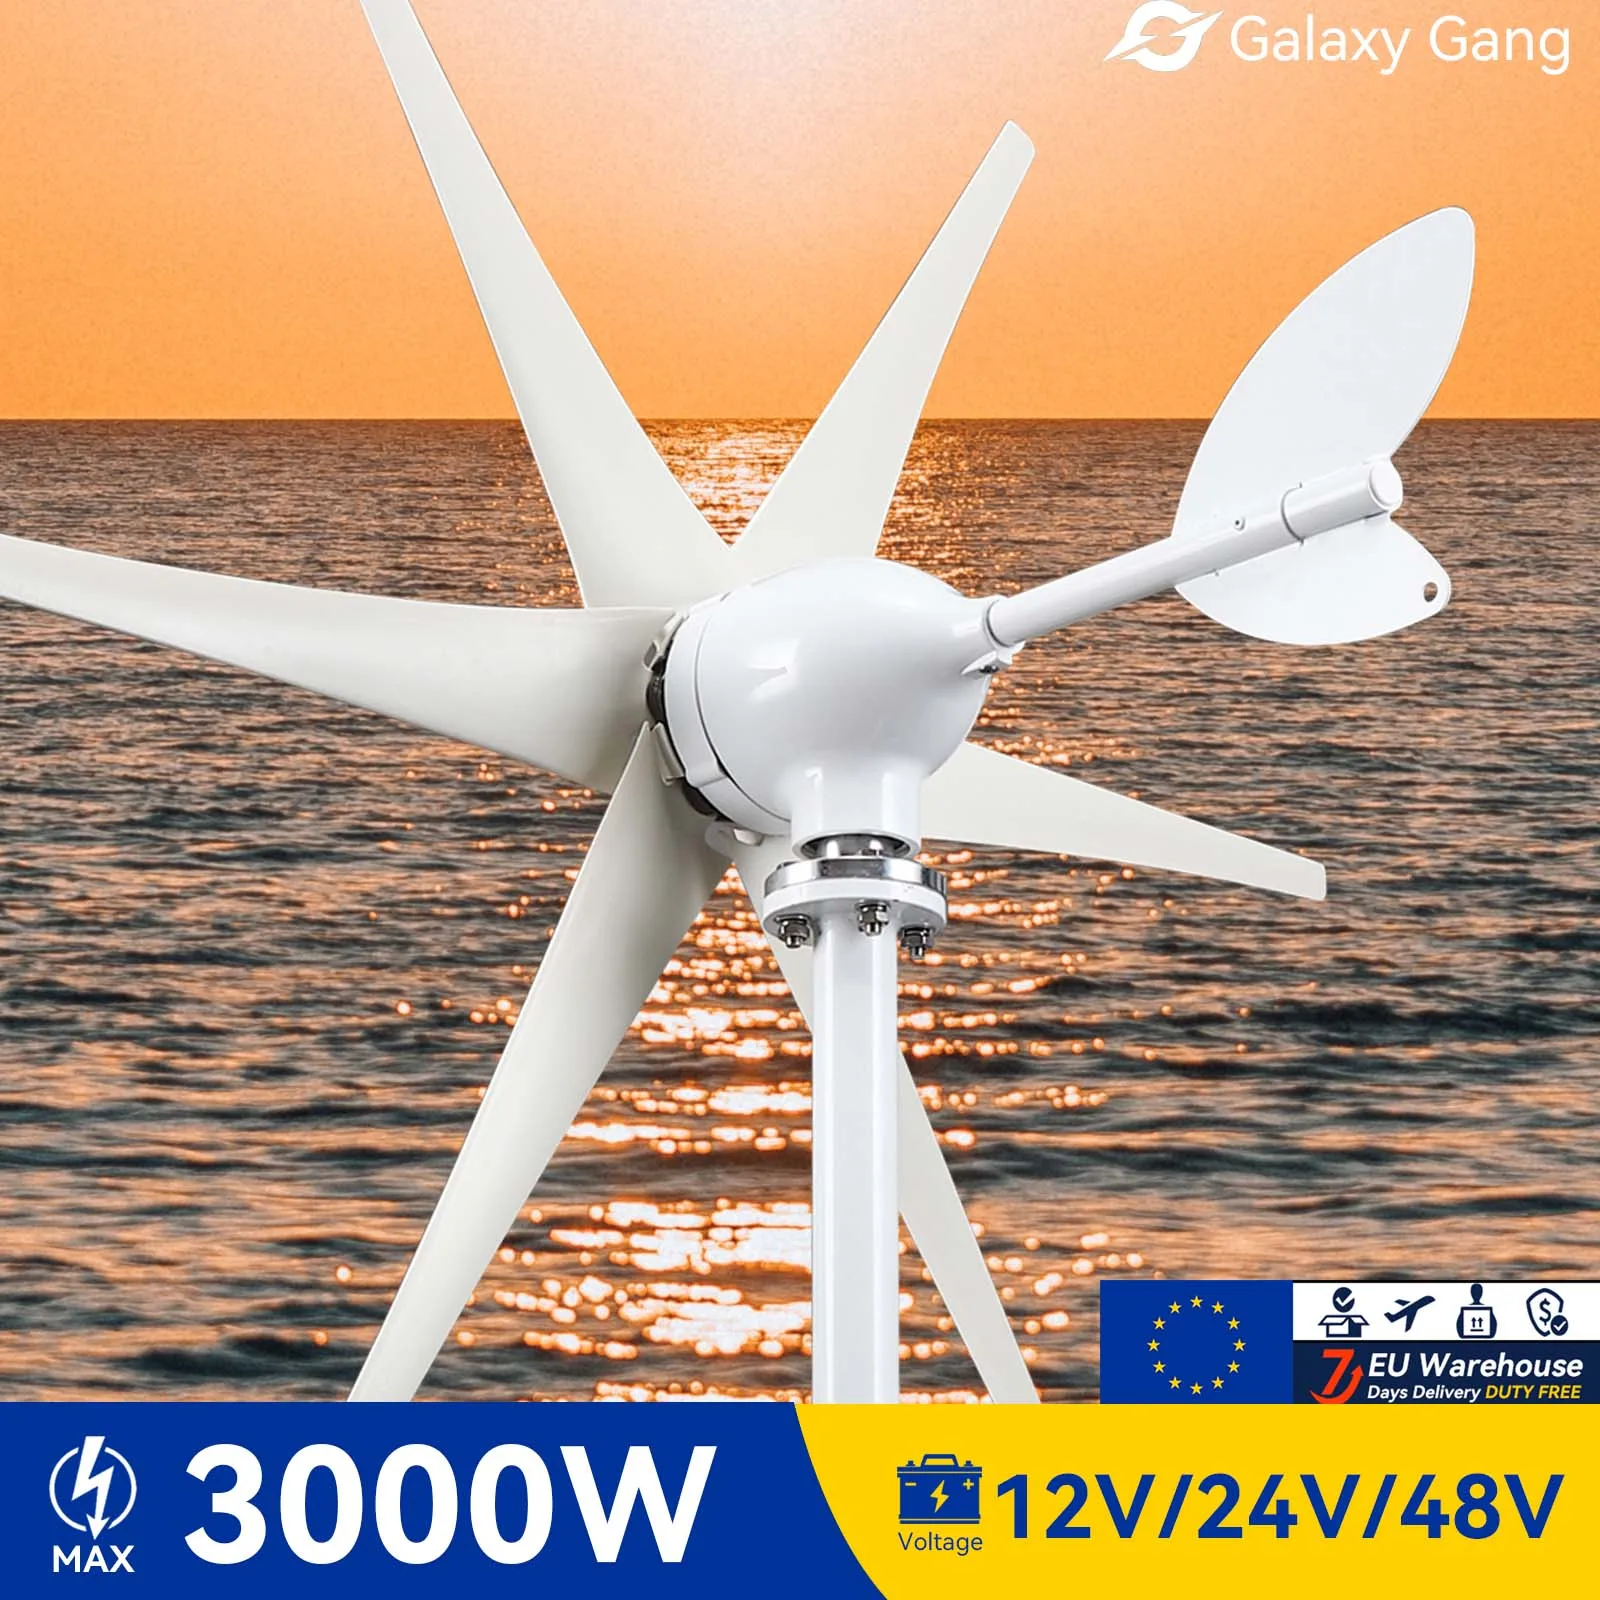 

Galaxy Gang 6 Blades Windmills Wind Turbine Generator Free Energy China Factory 3000W 12V 24V 48V With Mppt Charge Controller